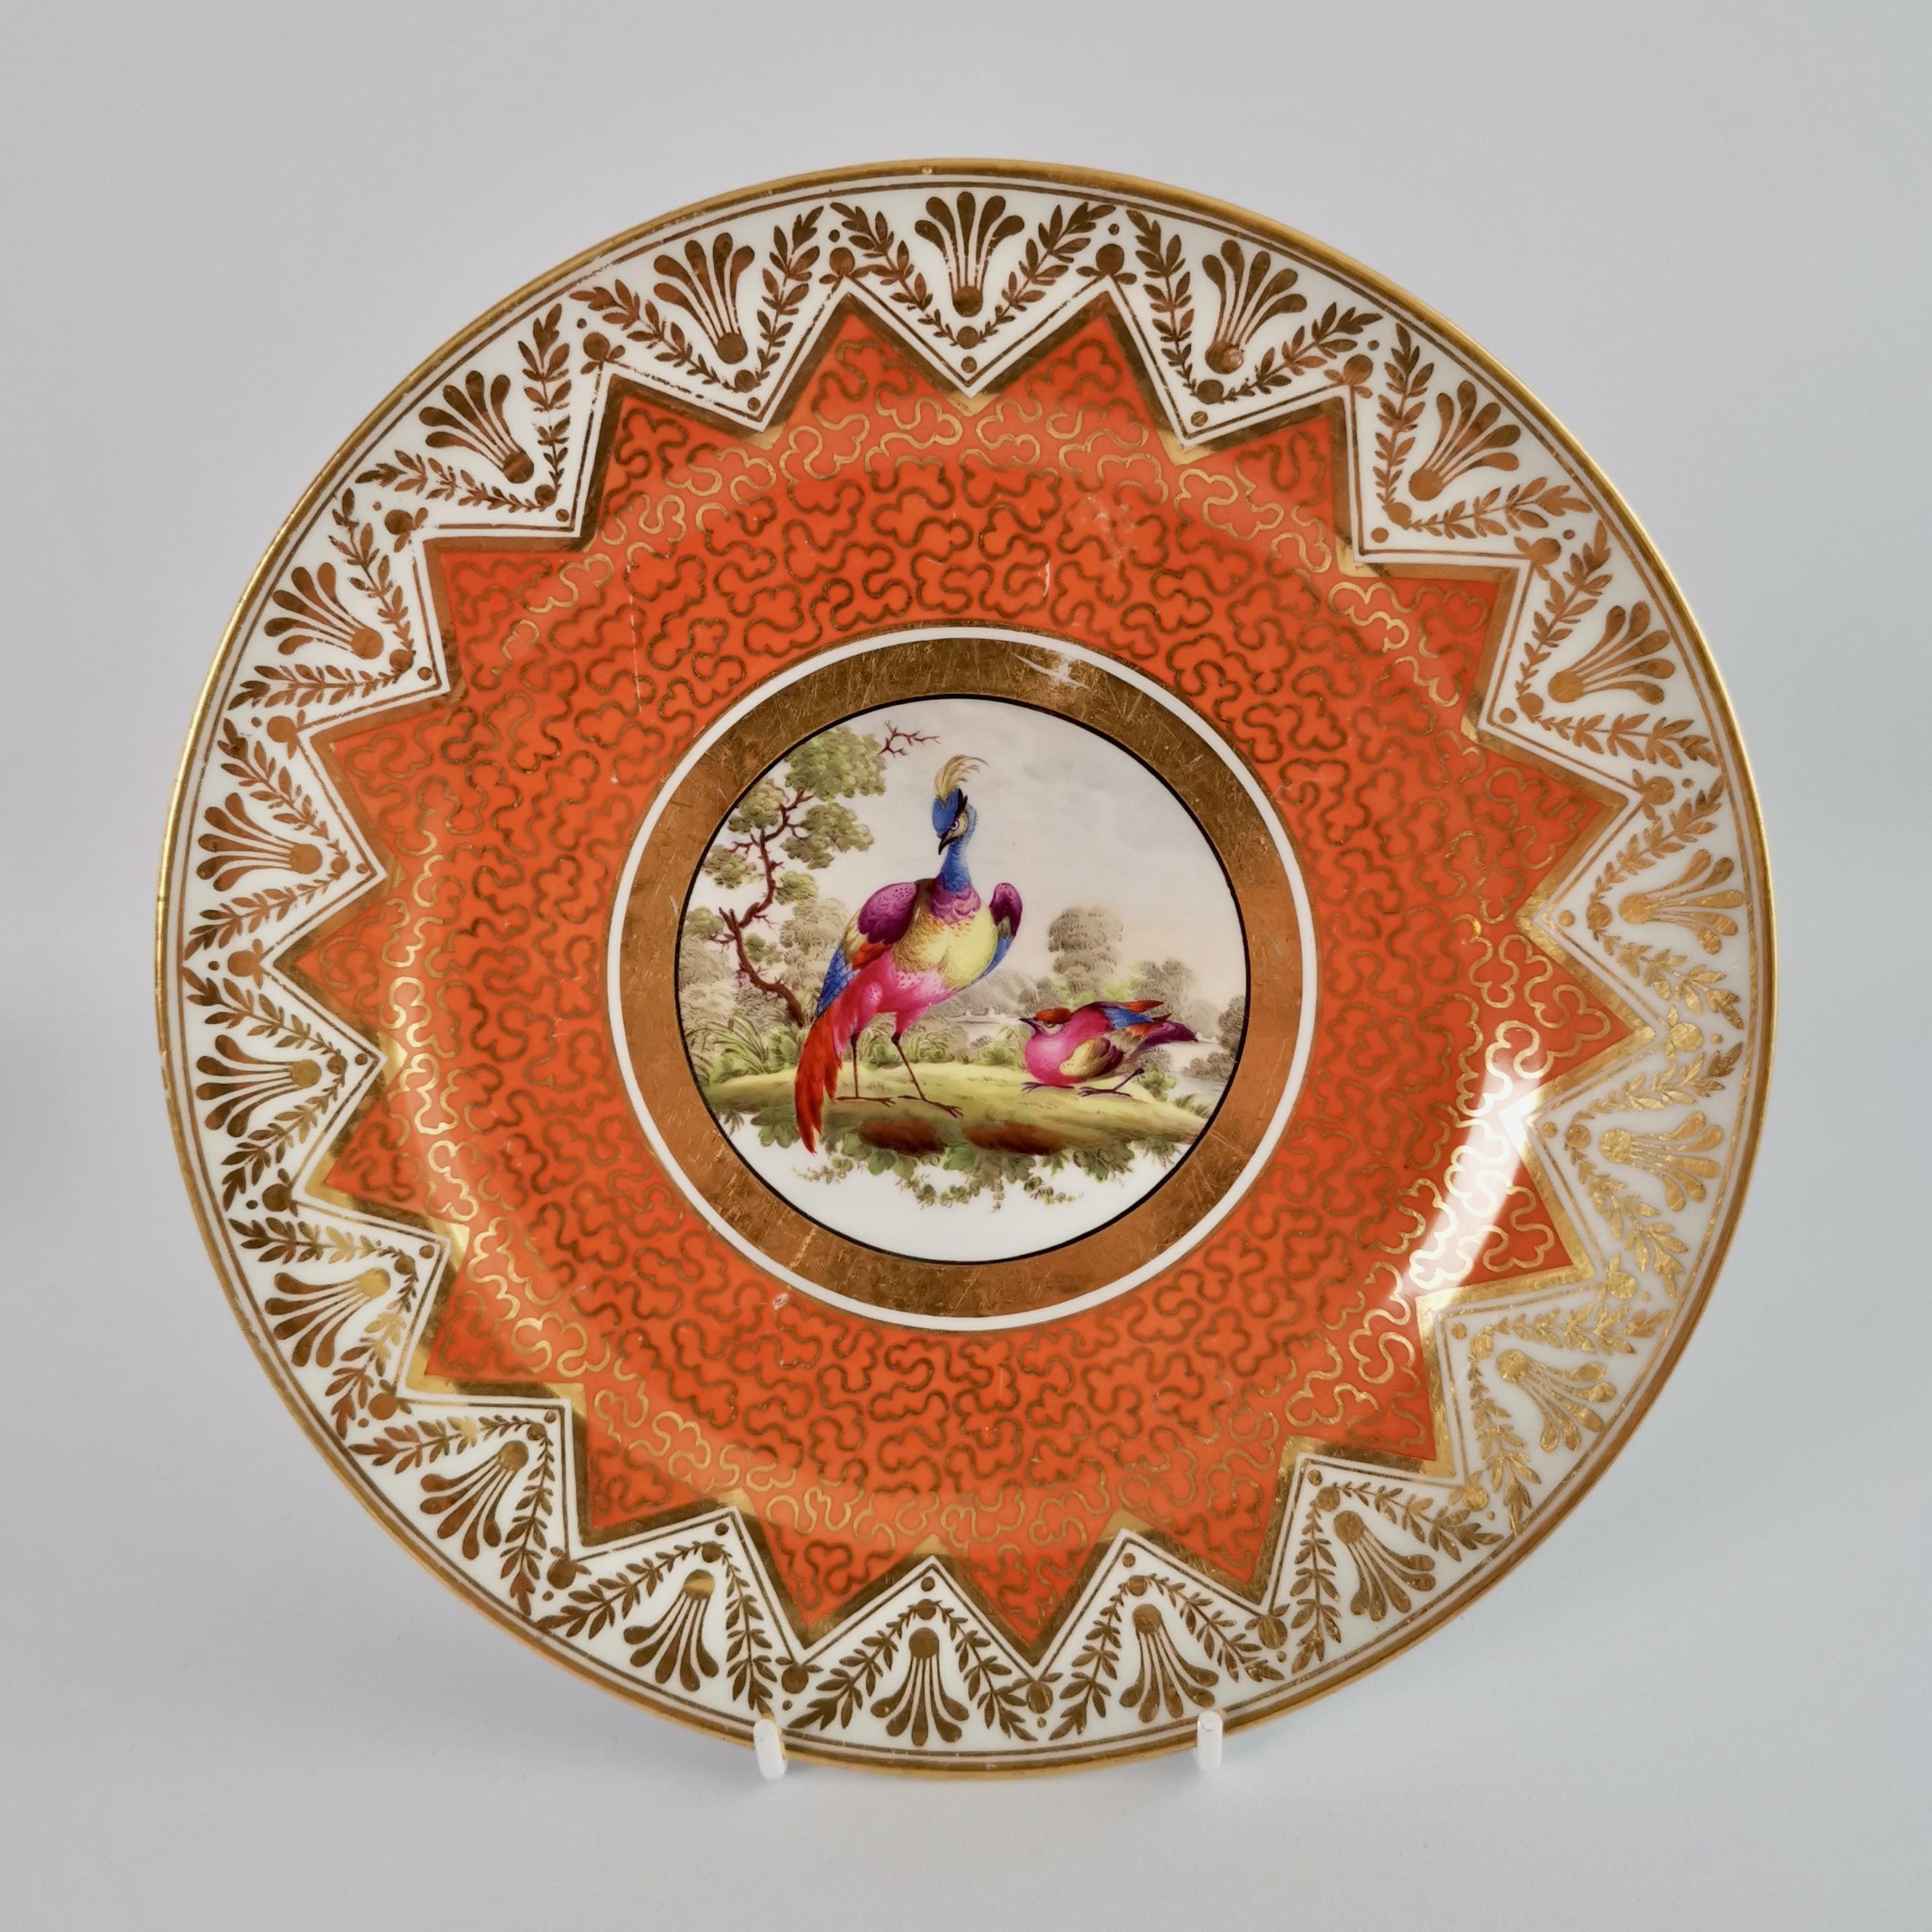 Hand-Painted Chamberlains Worcester Set of Plates, Orange, Paintings by H. Chamberlain, 1815